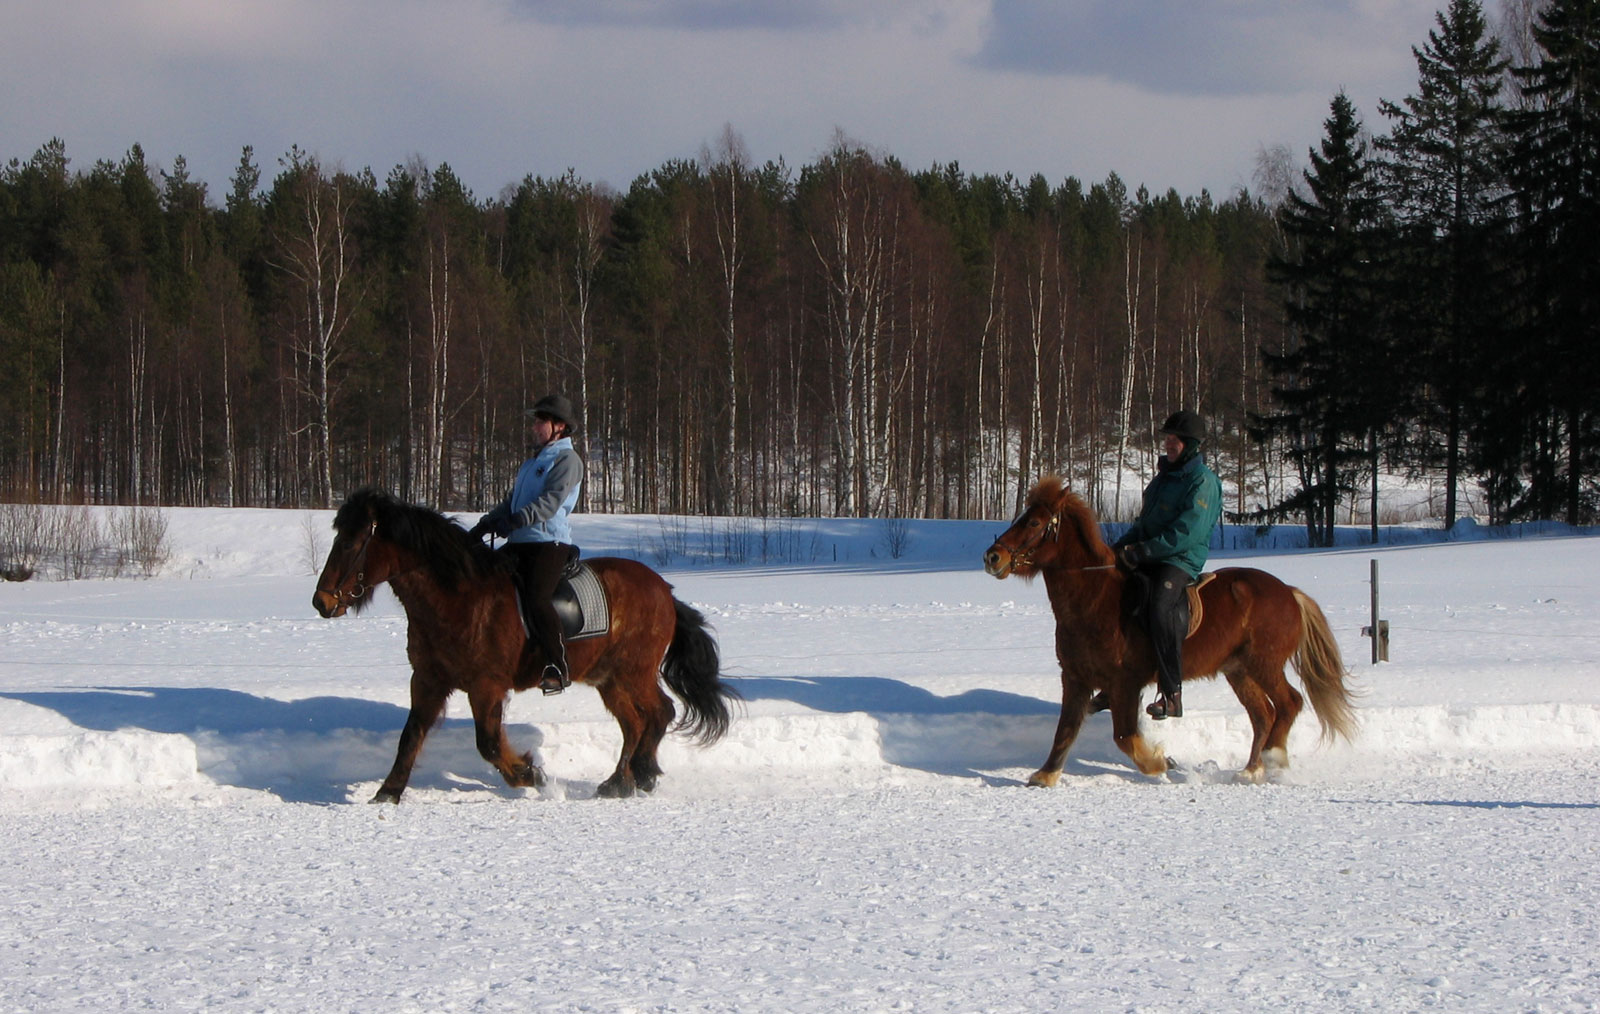 Equestrian Tourism Offer in Europe